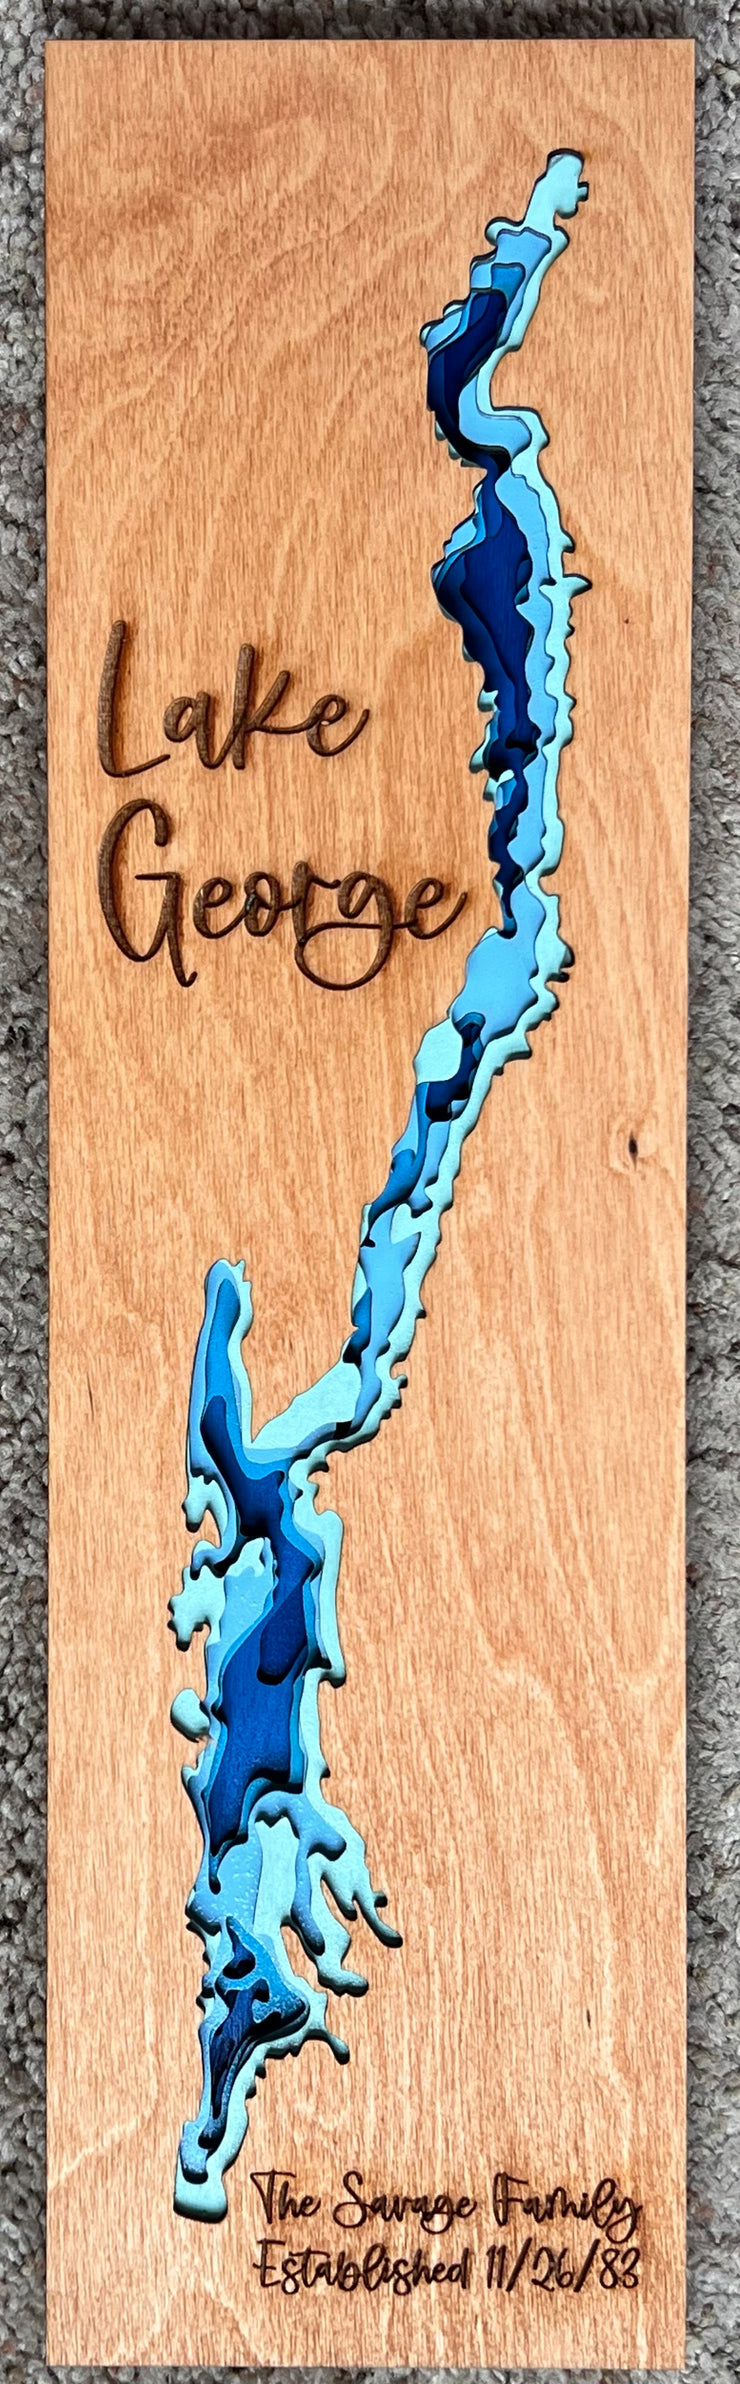 Lake George, NY Beautiful 6 Layers of Stained and Painted Wood Art, Handmade gift, Desk Top size and Wall Decor, Perfect for home